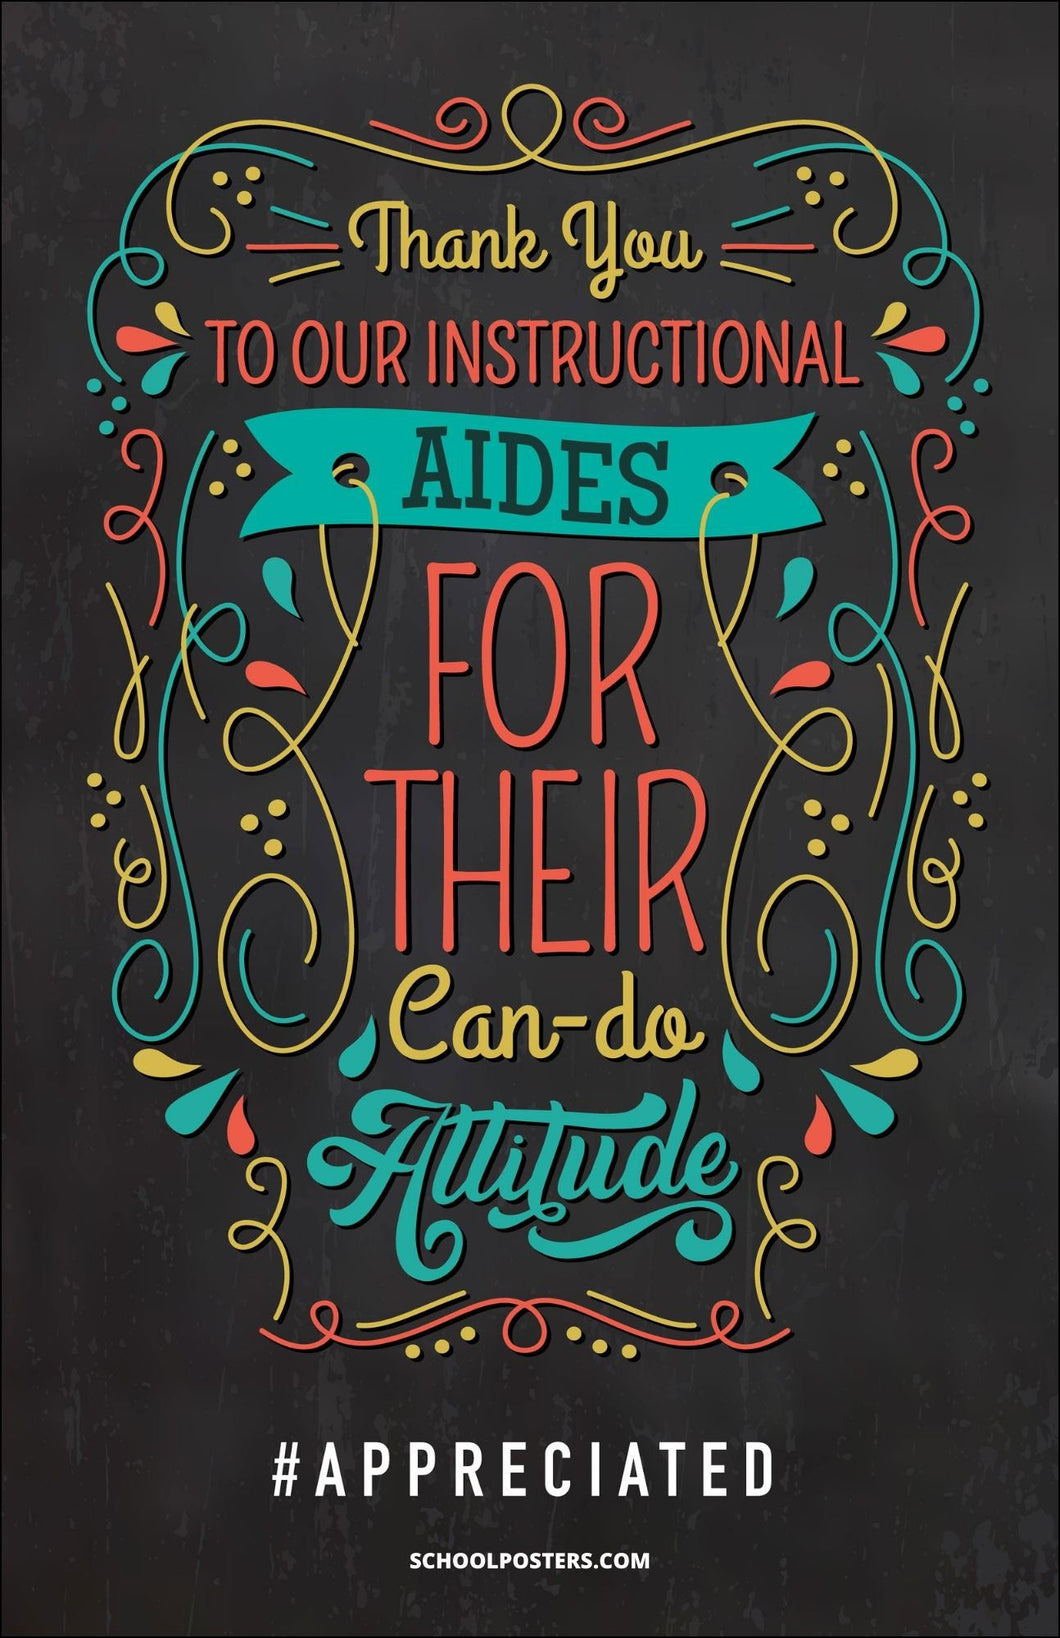 Thank You Instructional Aides Poster